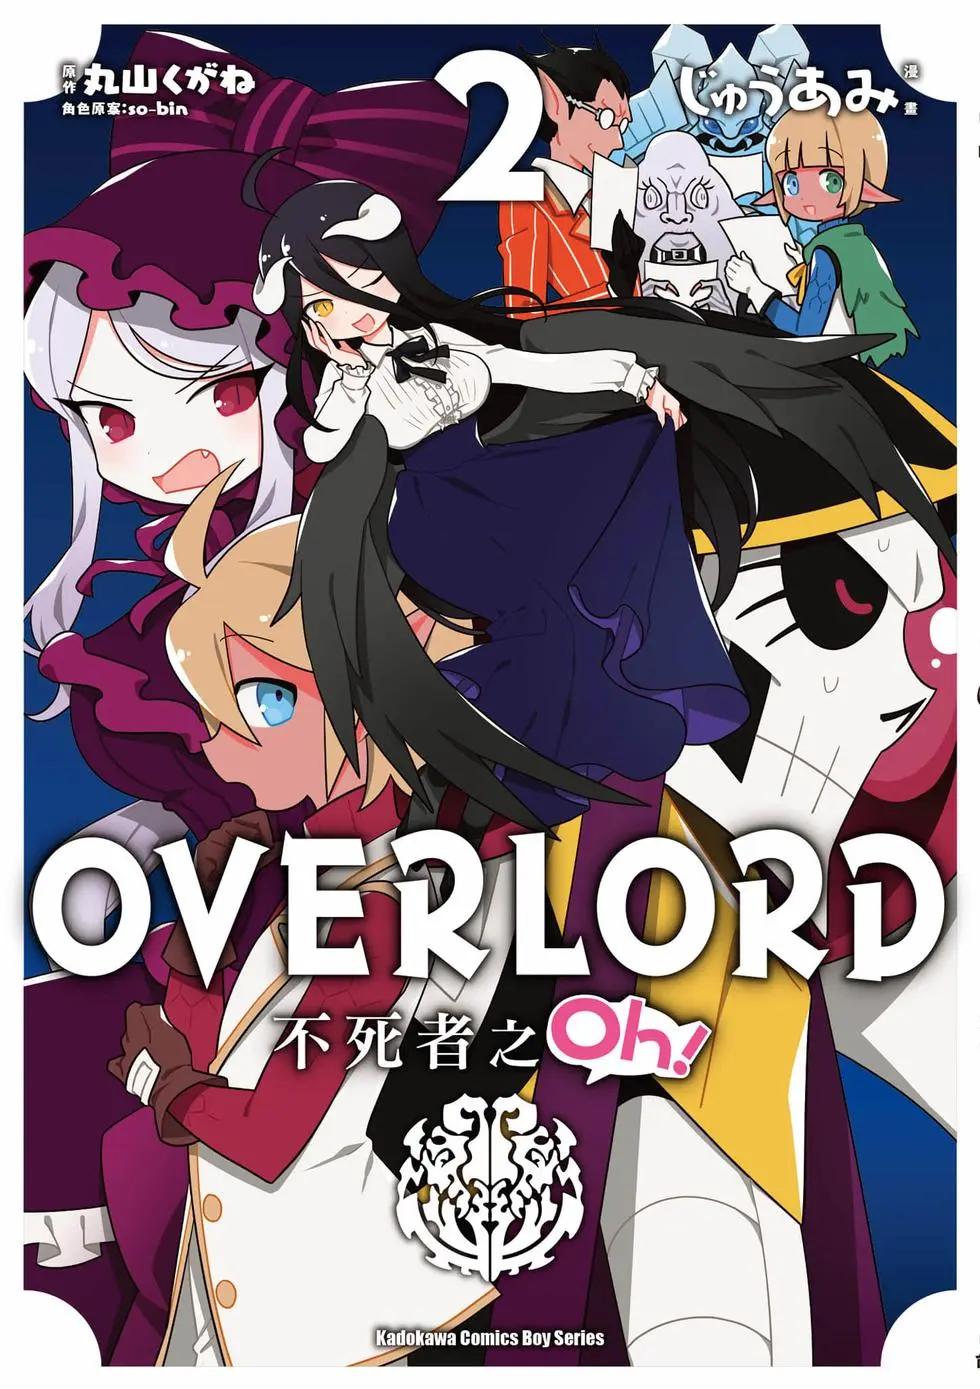 Overlord不死者之OH！ - 第02卷(1/3) - 1